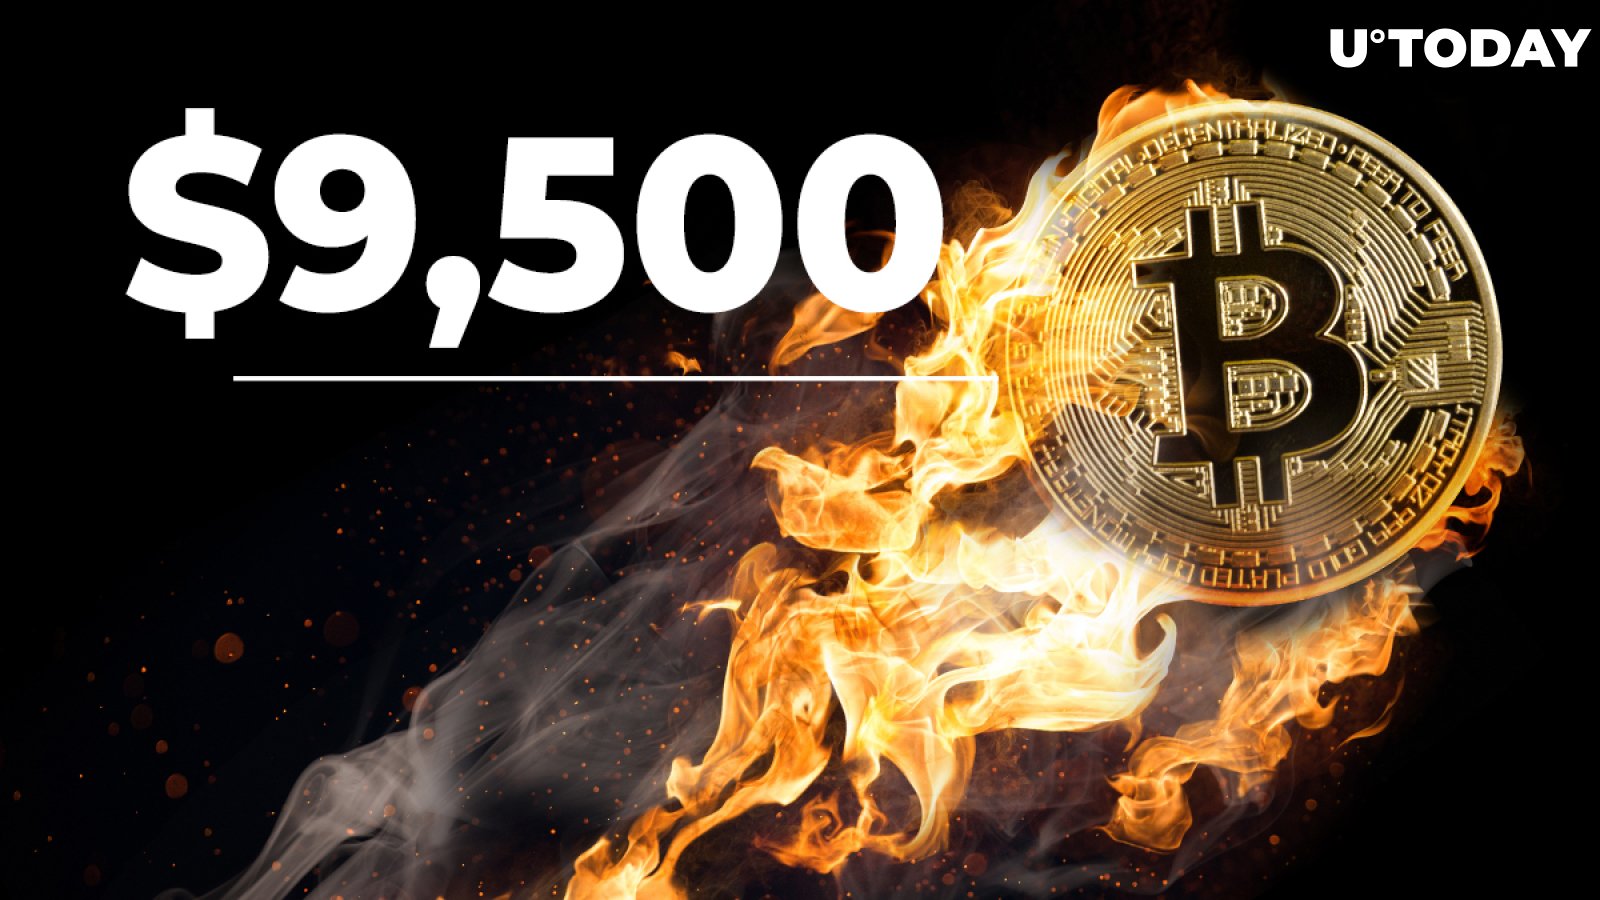 JUST IN: Bitcoin Price Surges to $9,500. Are Bulls About to Take the Wheel?